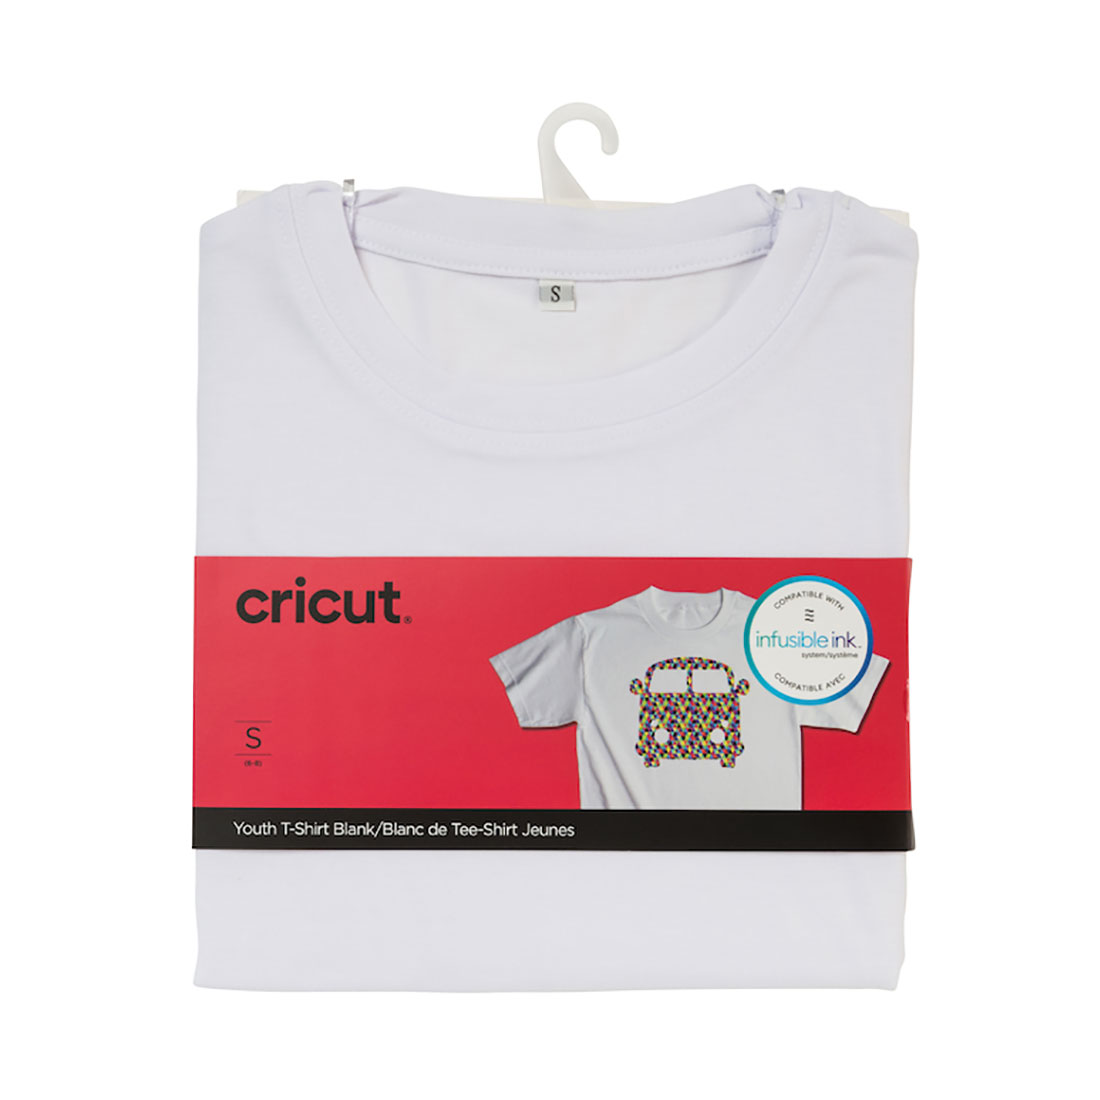 Cricut Gray Crew-neck T-shirt Blank Size L Sublimation/Infusible Ink